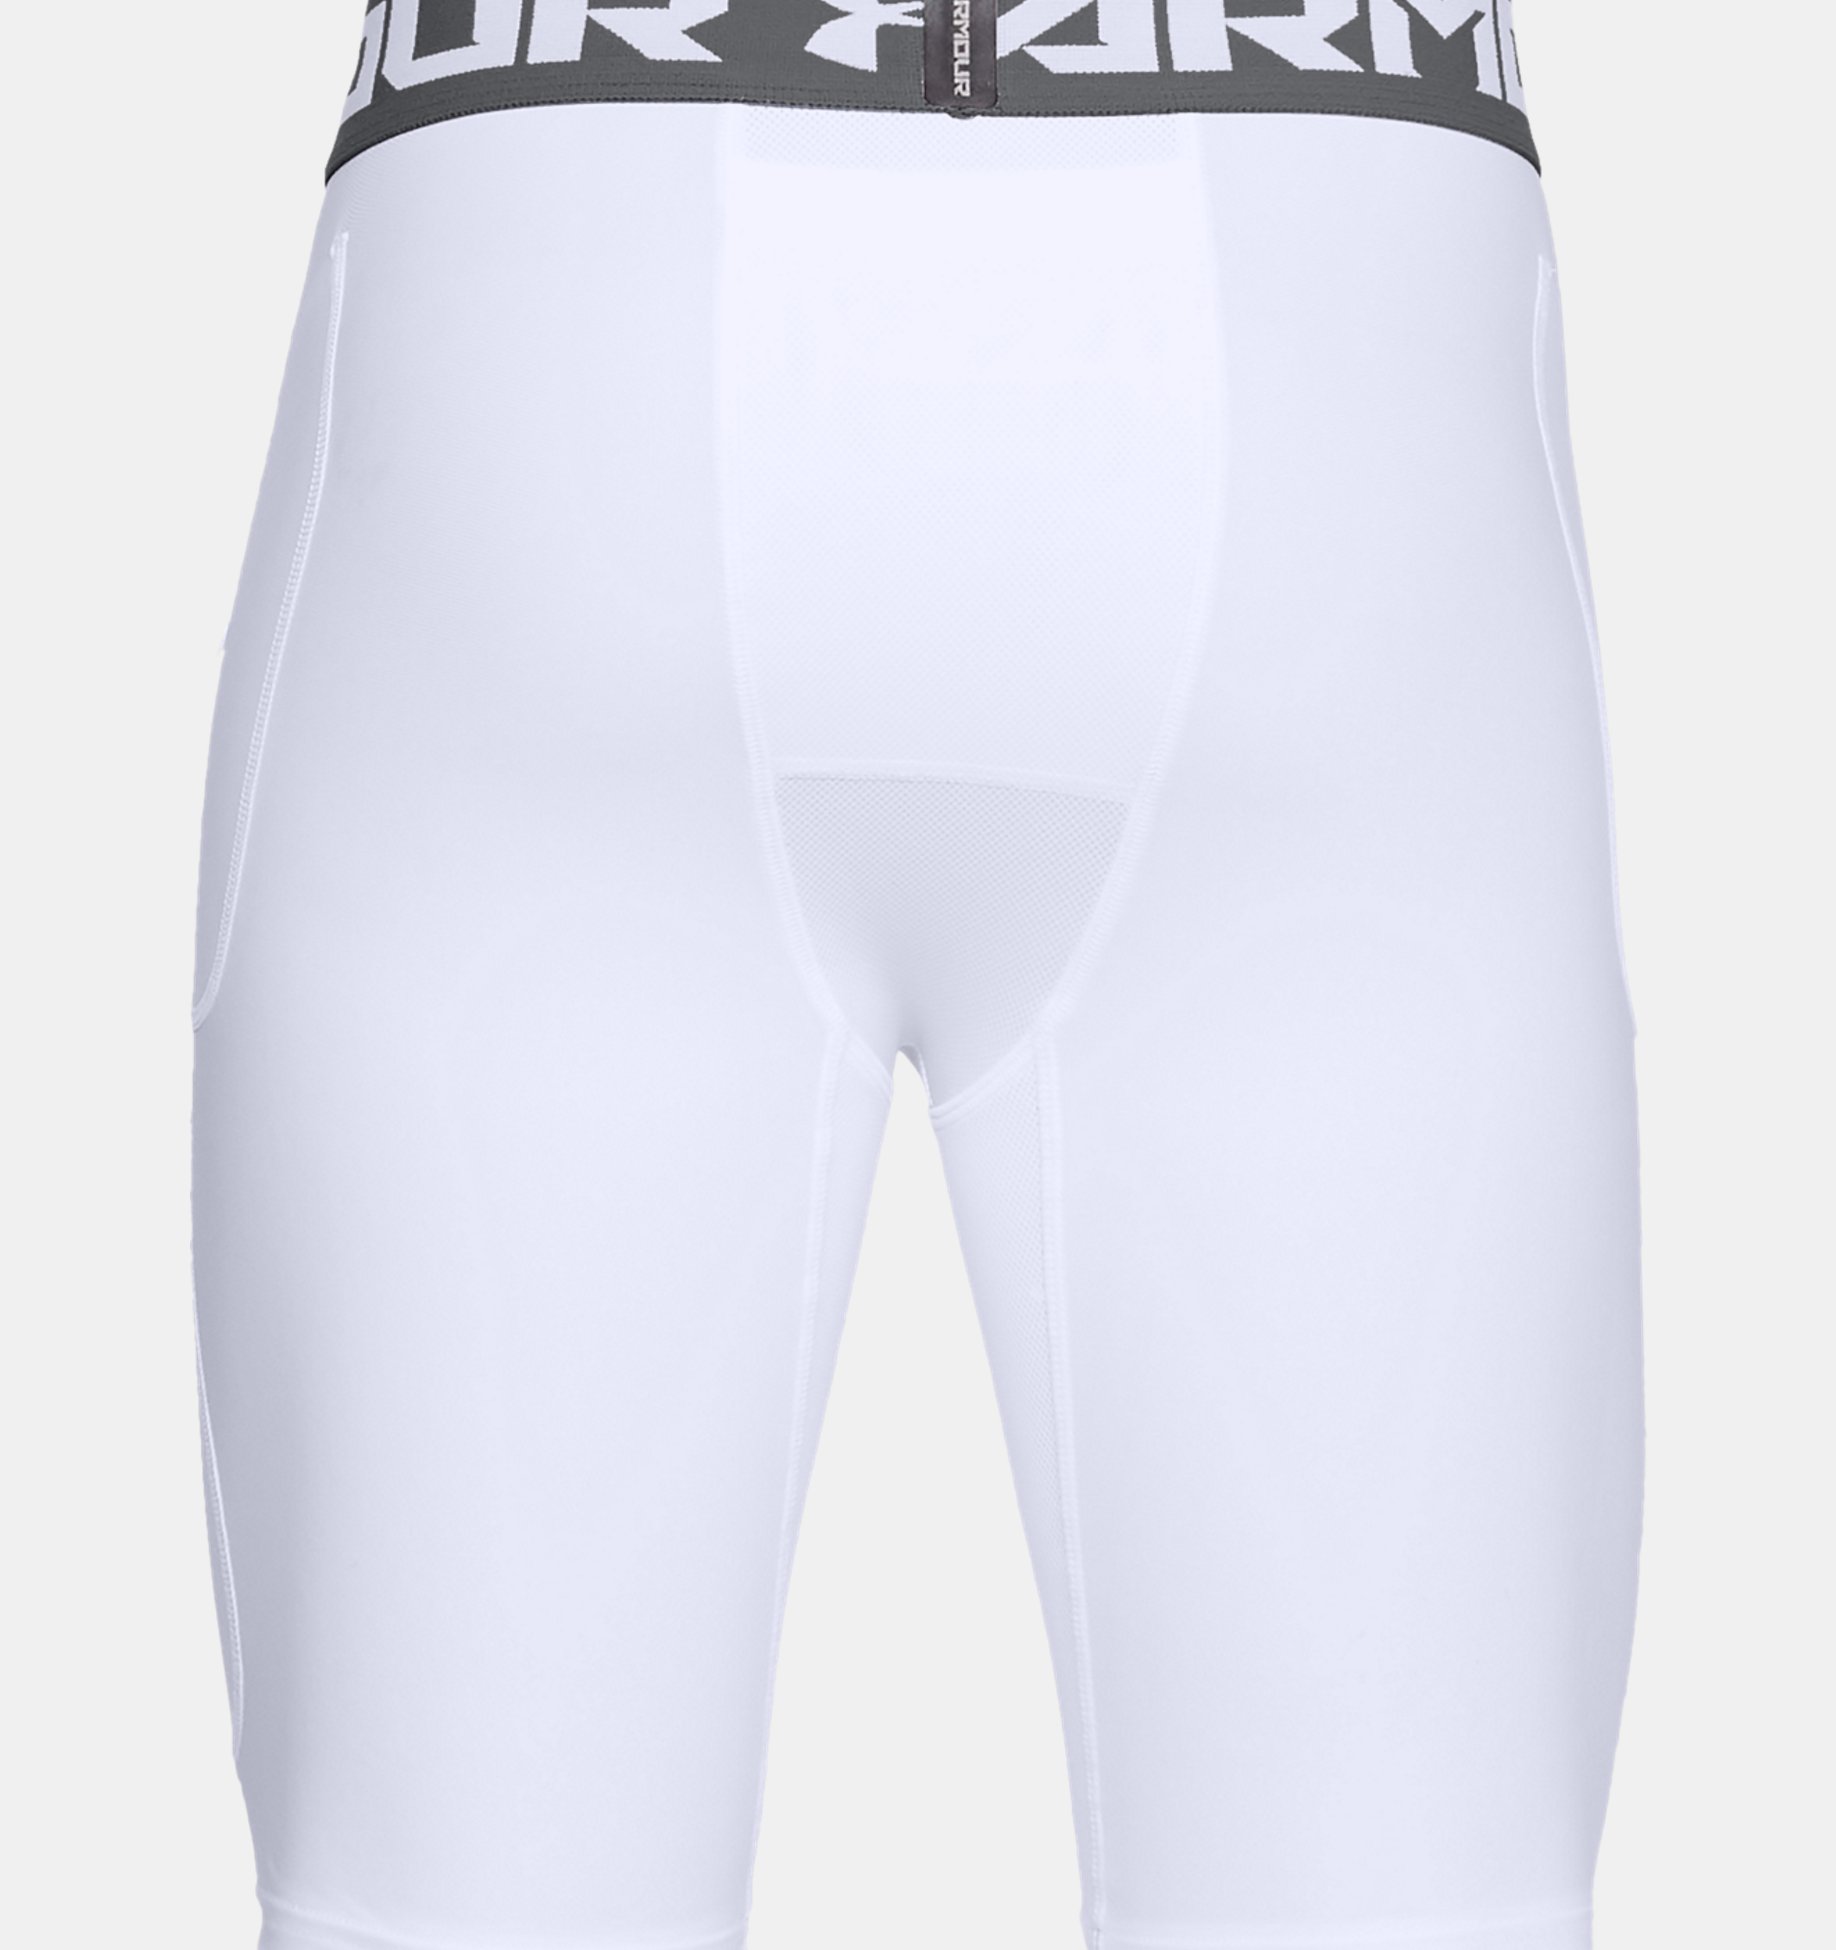 Details about   Under Armour boys turf Gear 6 pocket Football girdle pants youth Small YSM 